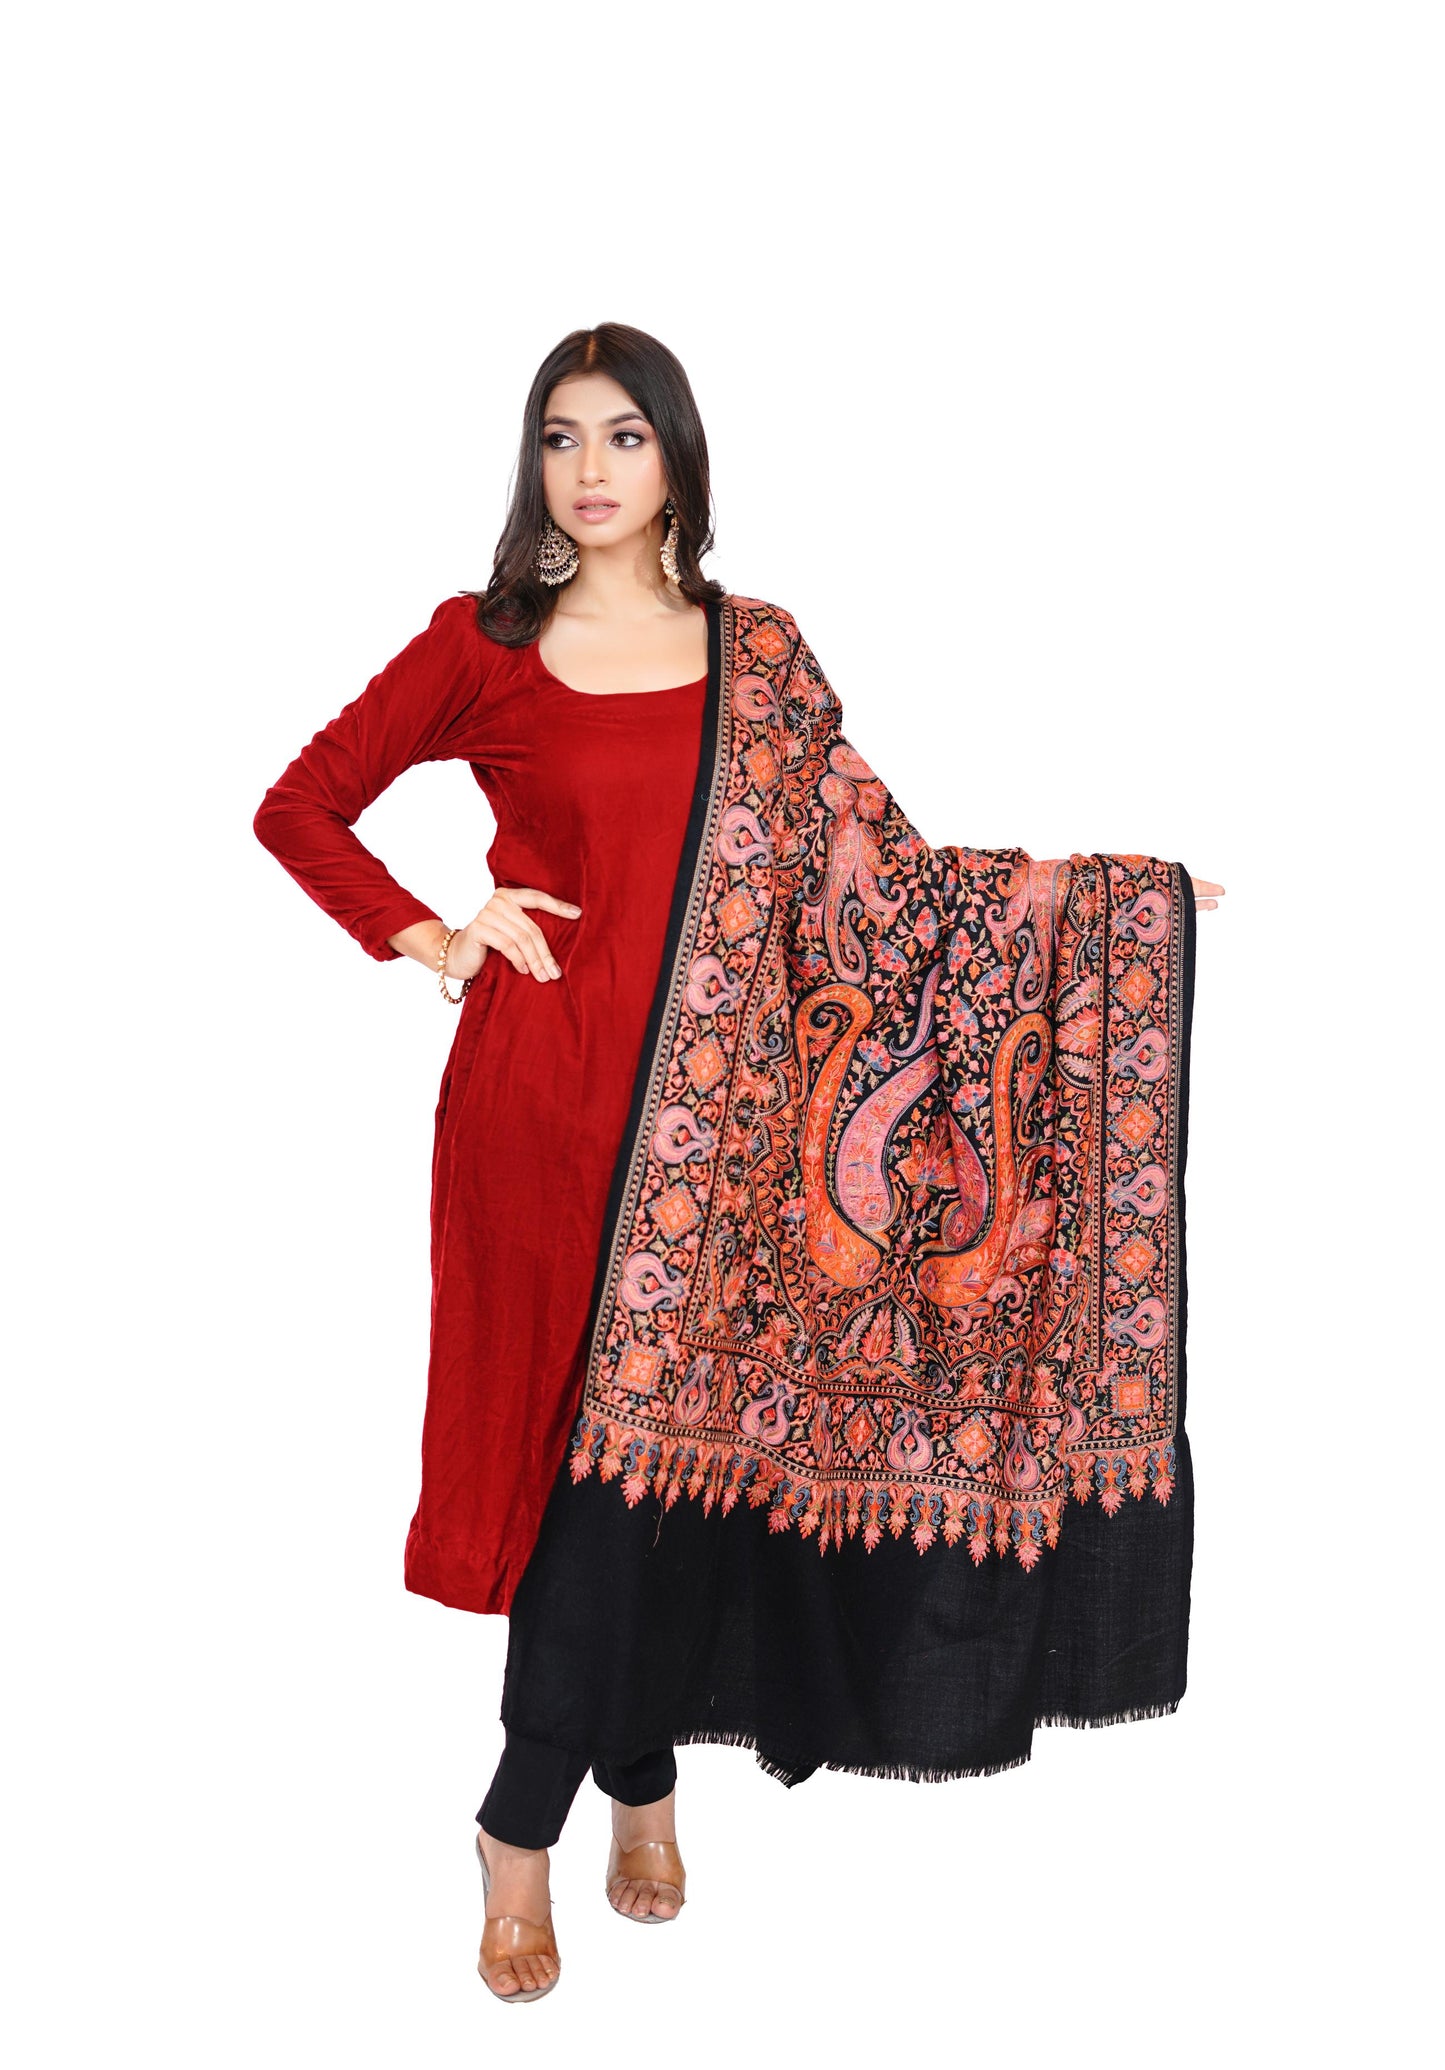 Heritage Embroidered Jaal Jamawar Shawl for Women - Classic Black